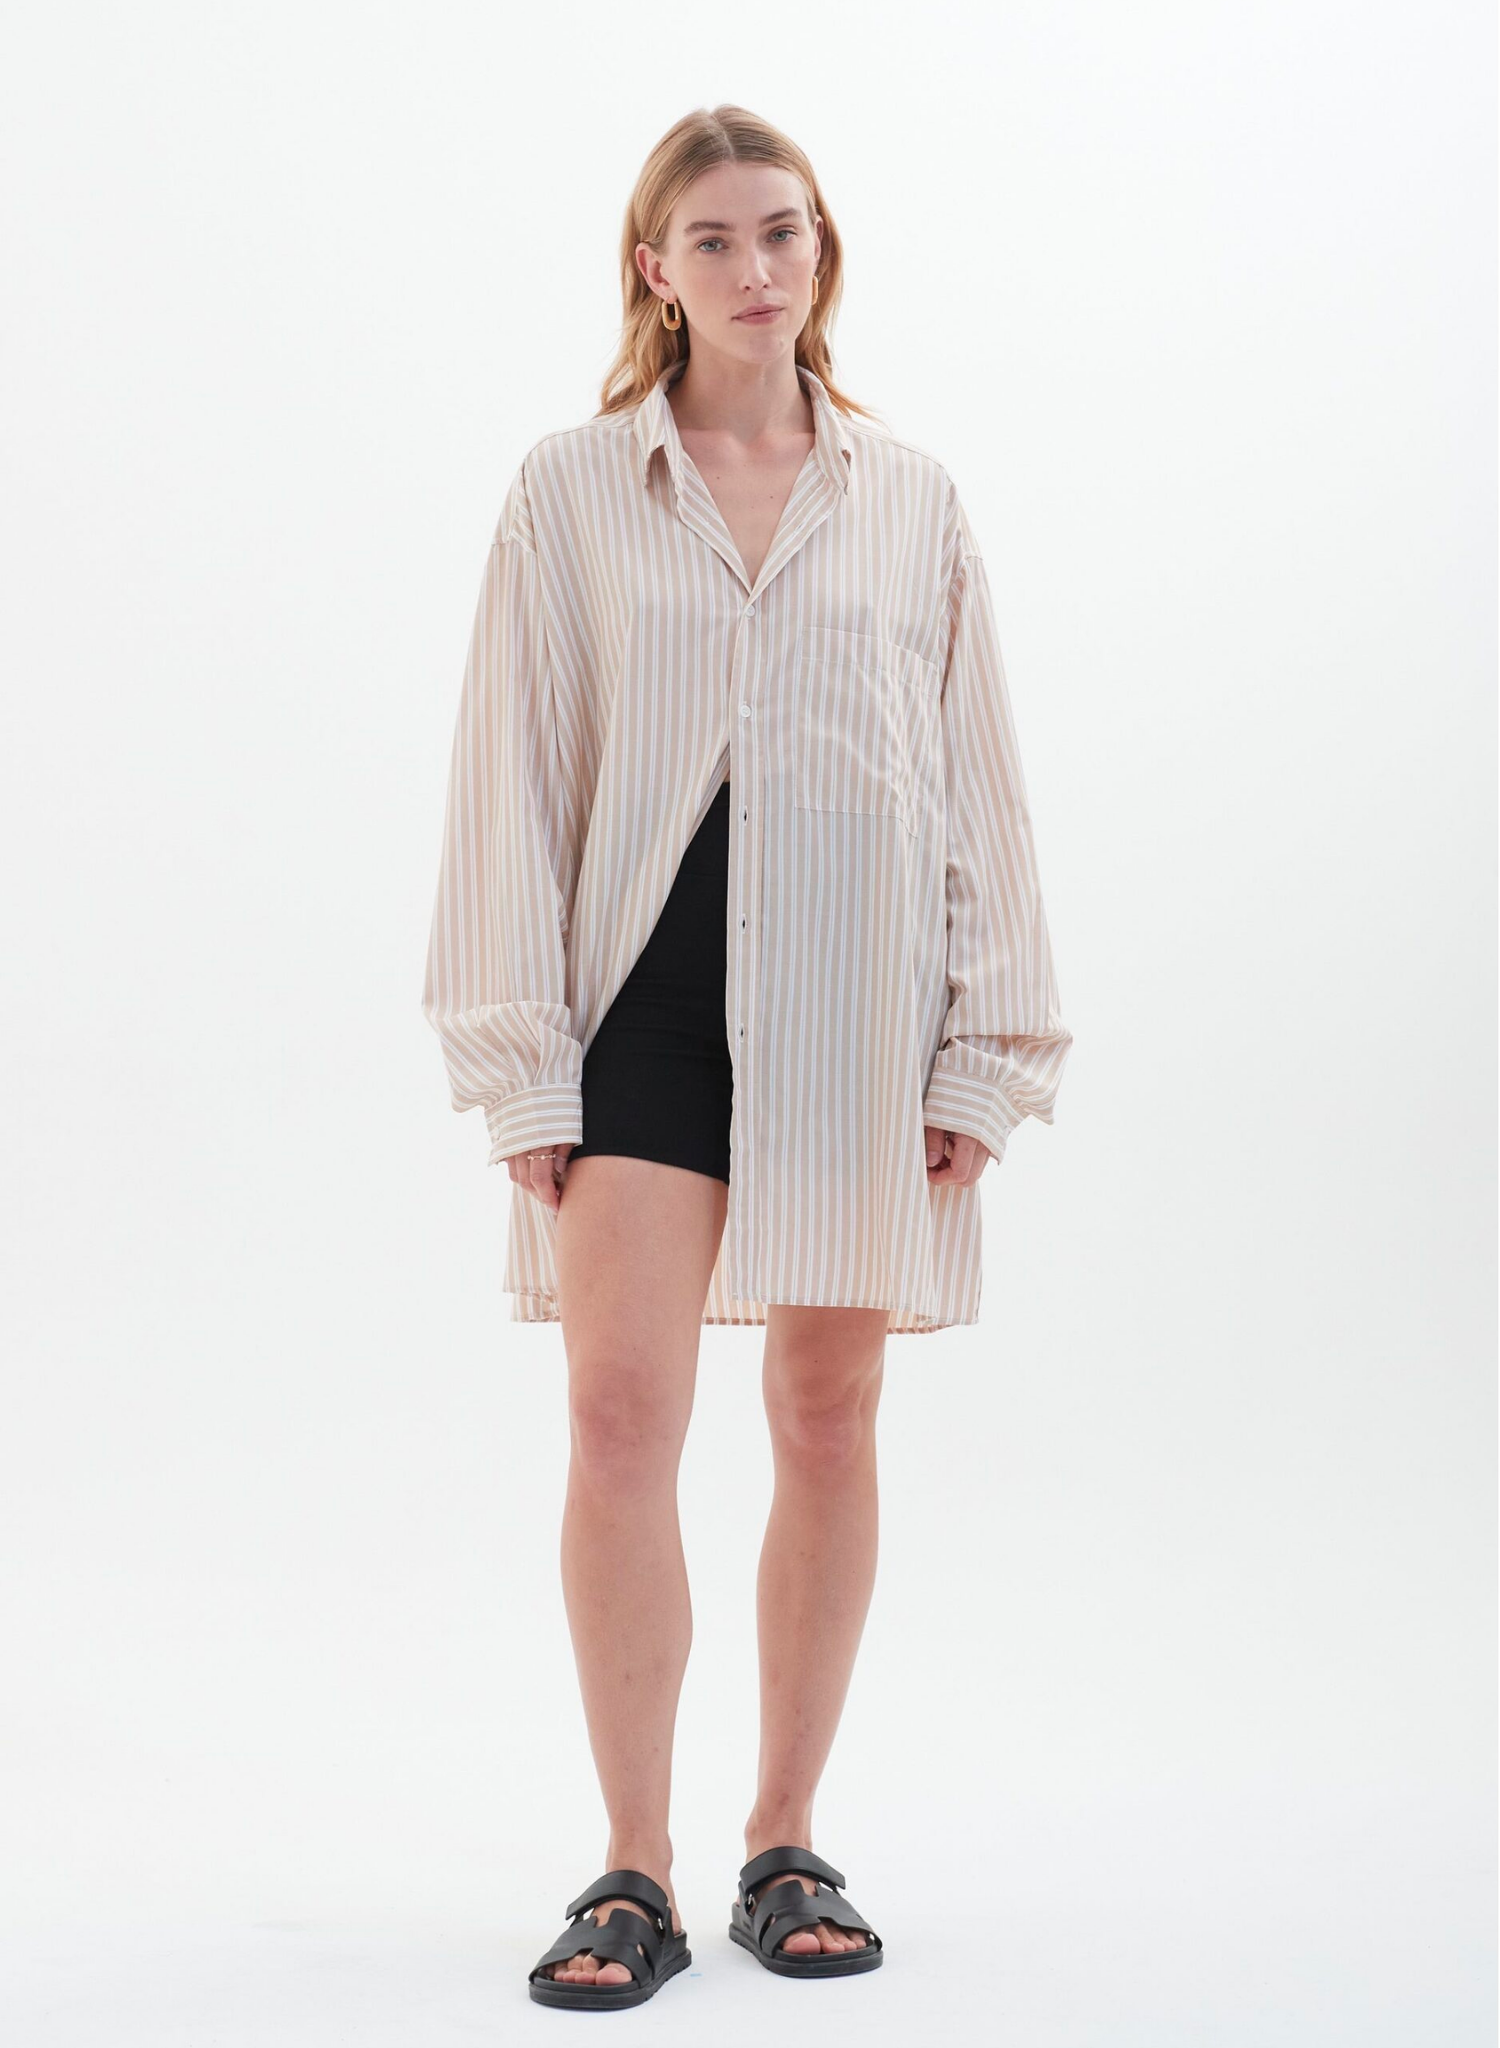 The Lucia Shirt is a nod to modern work shirting but with an oversized twist. The collared neckline, dropped shoulders, and long sleeves keep the embellishments to a minimal. Layer over a tee or style with tailored trousers to complement the piece’s casual aesthetic.